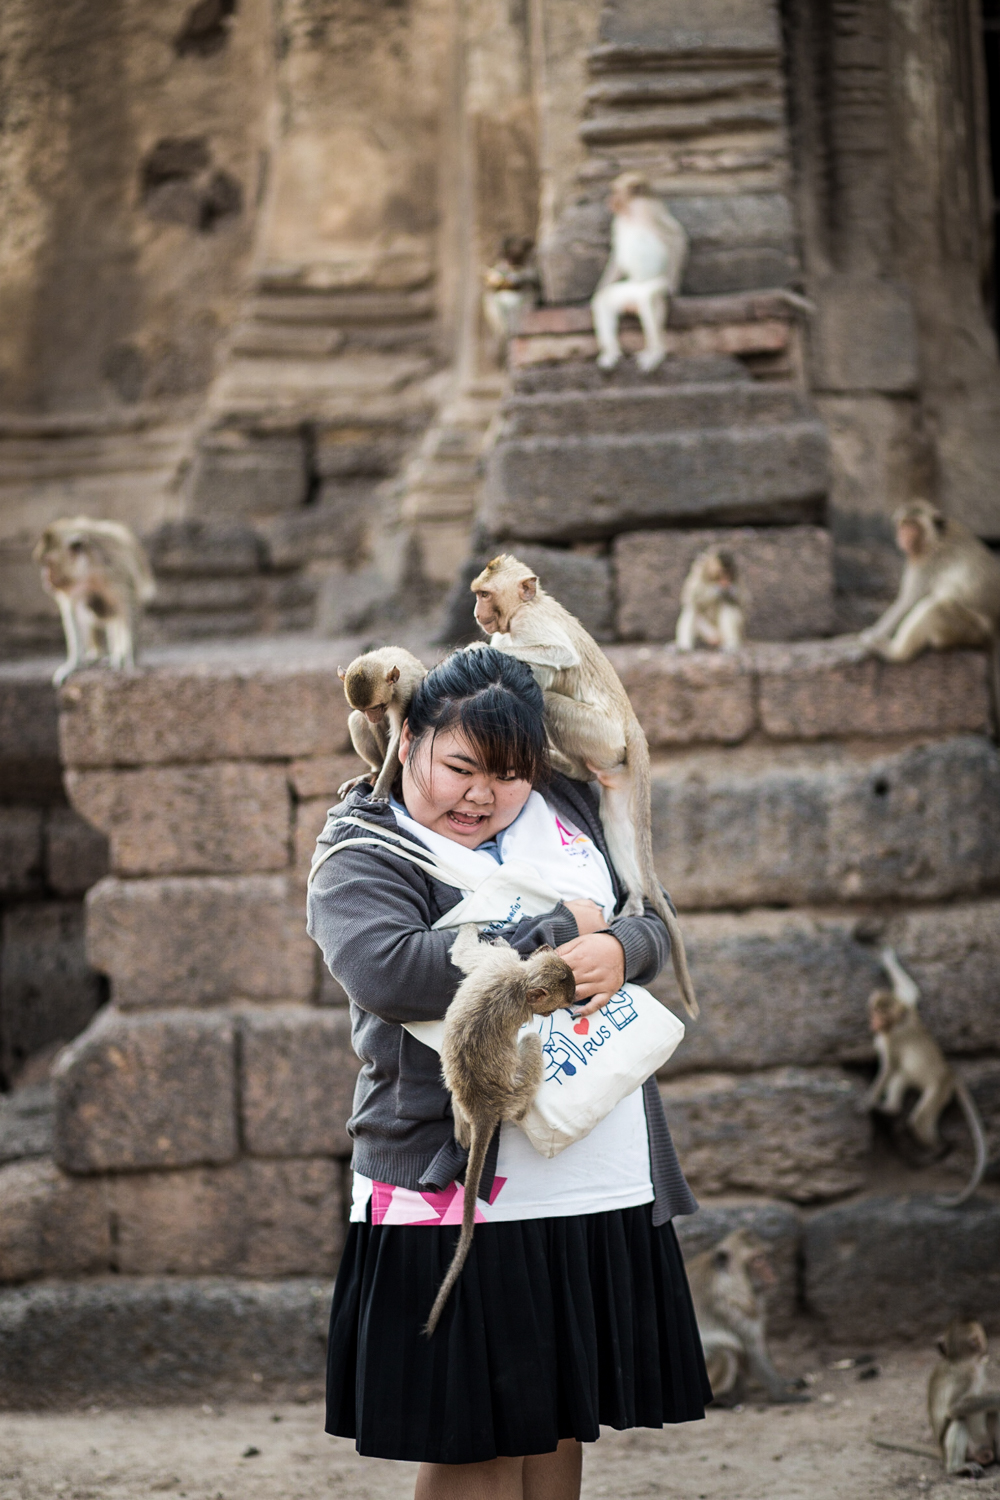  This is what happens if you feed the monkeys.&nbsp; 